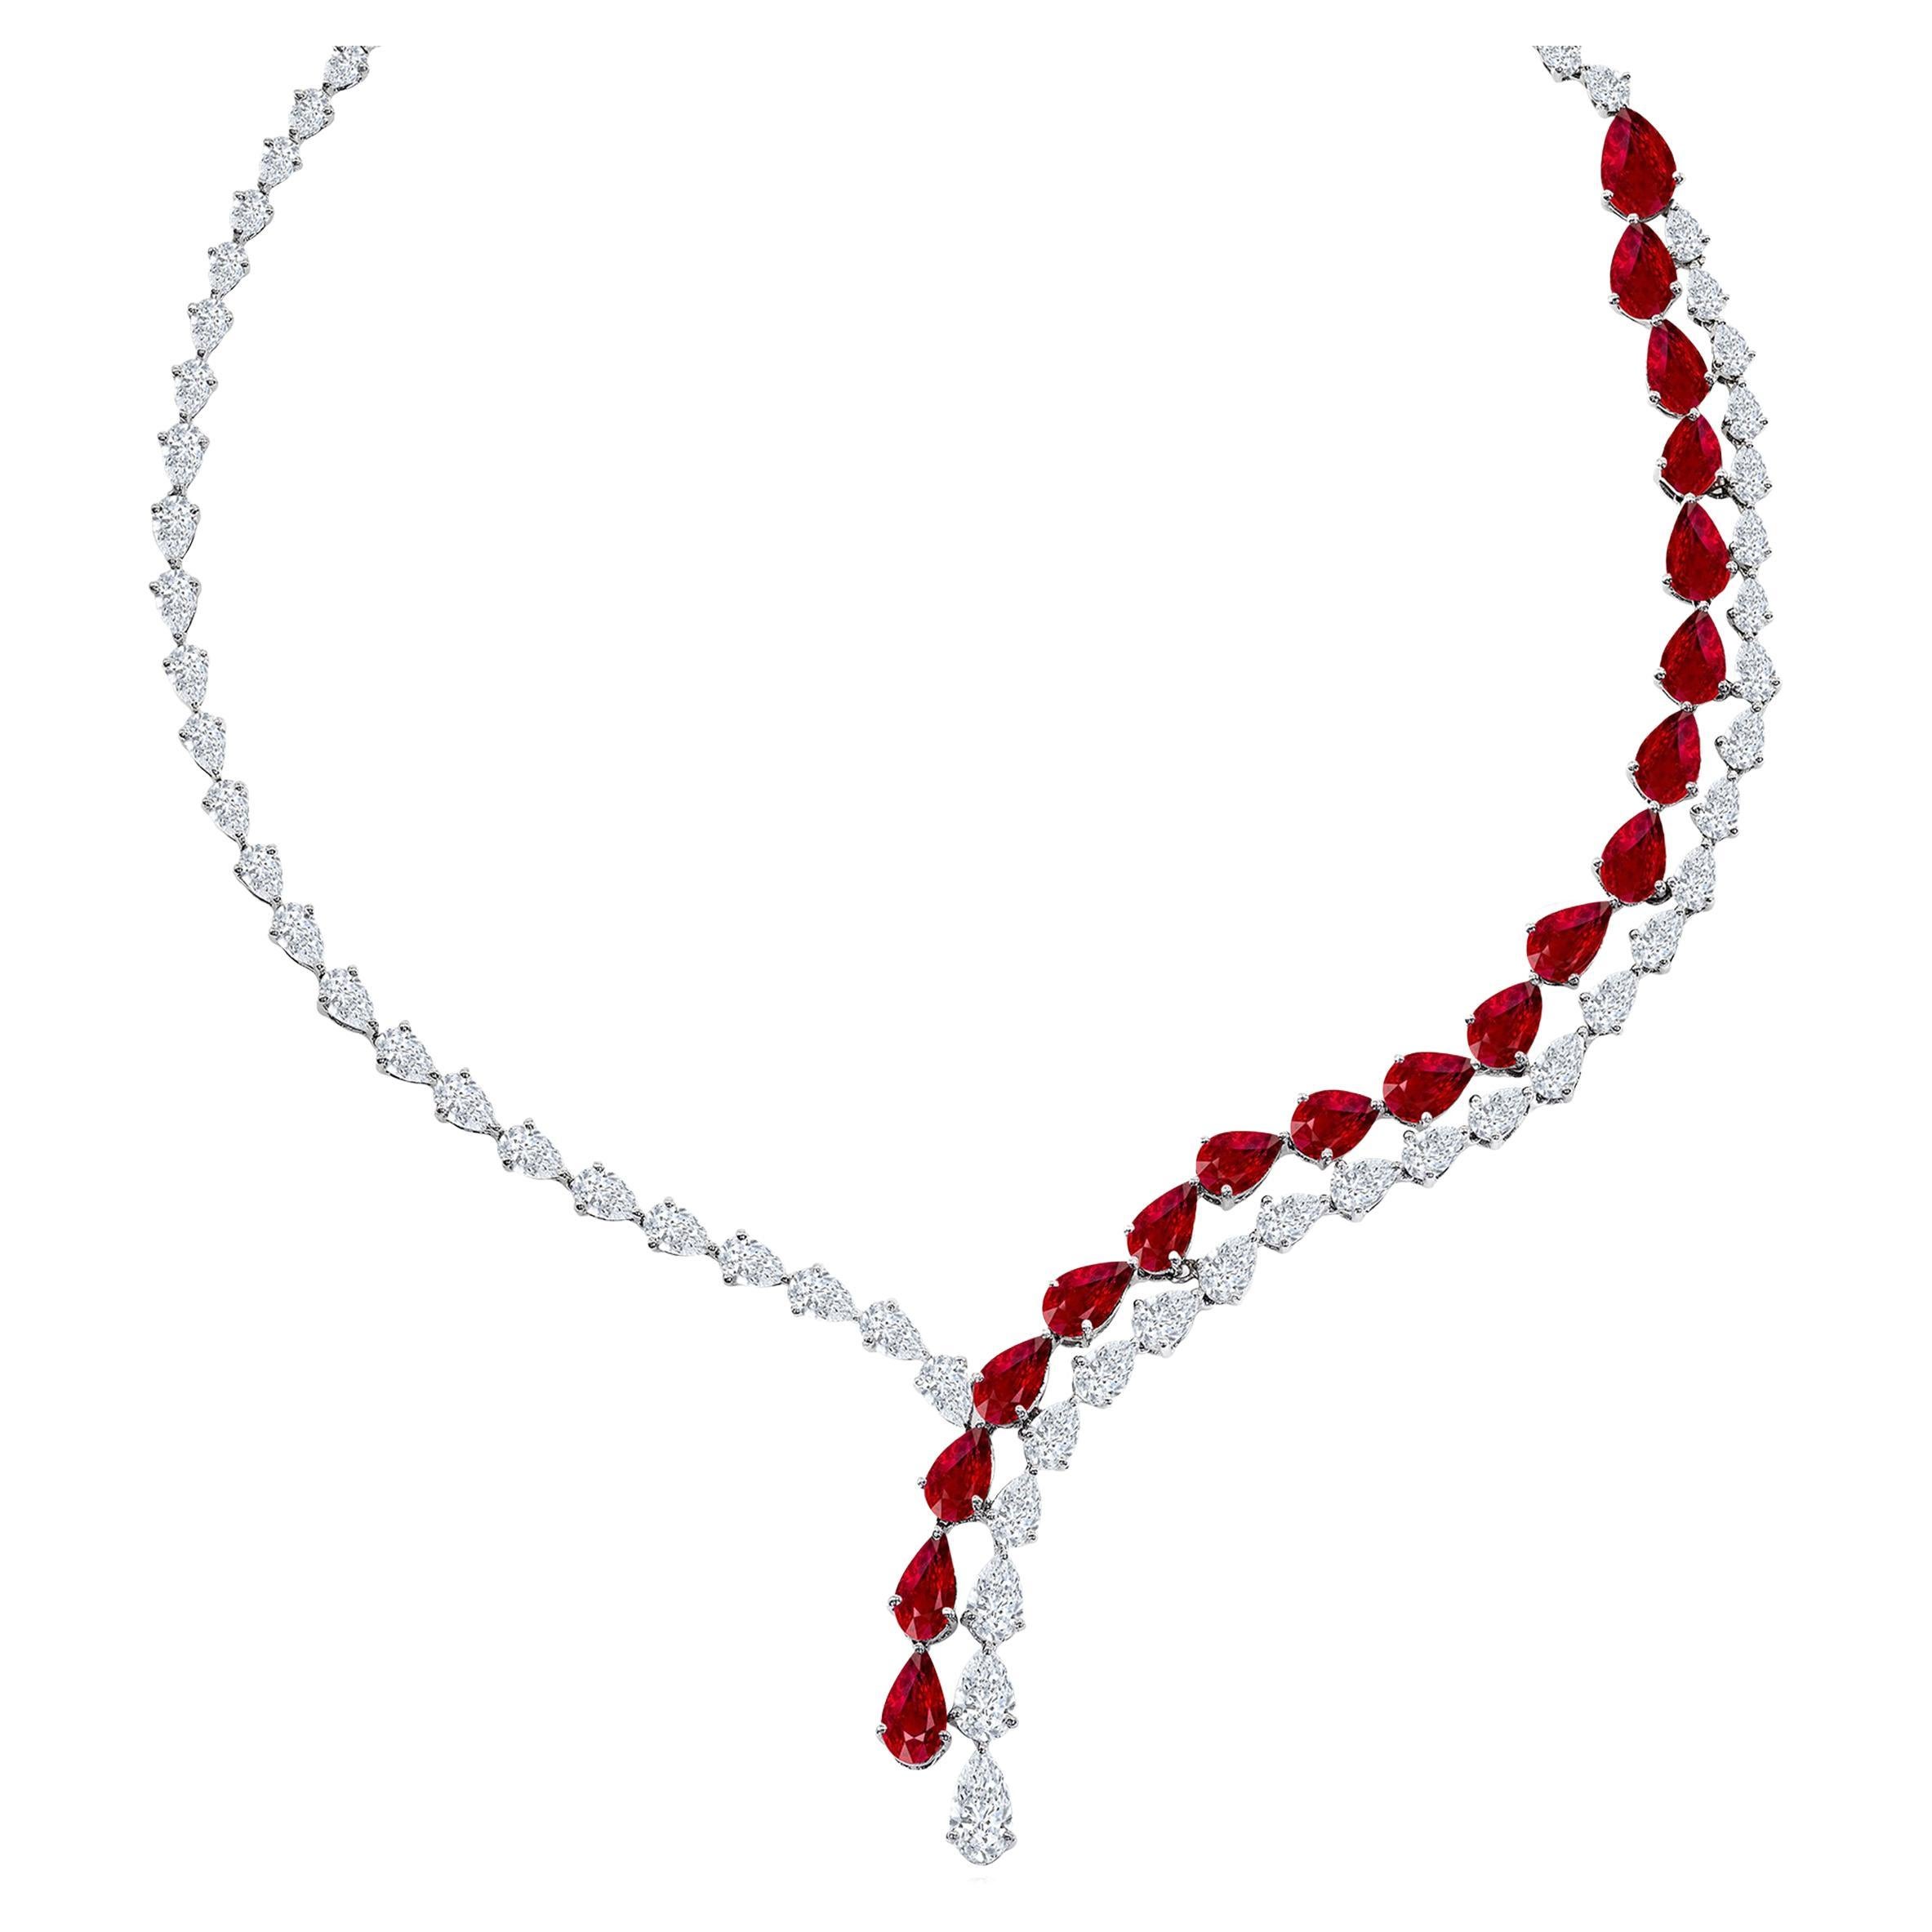 Certified 20.62 Carat Pear Shape Ruby and Diamond Drop Necklace in Platinum